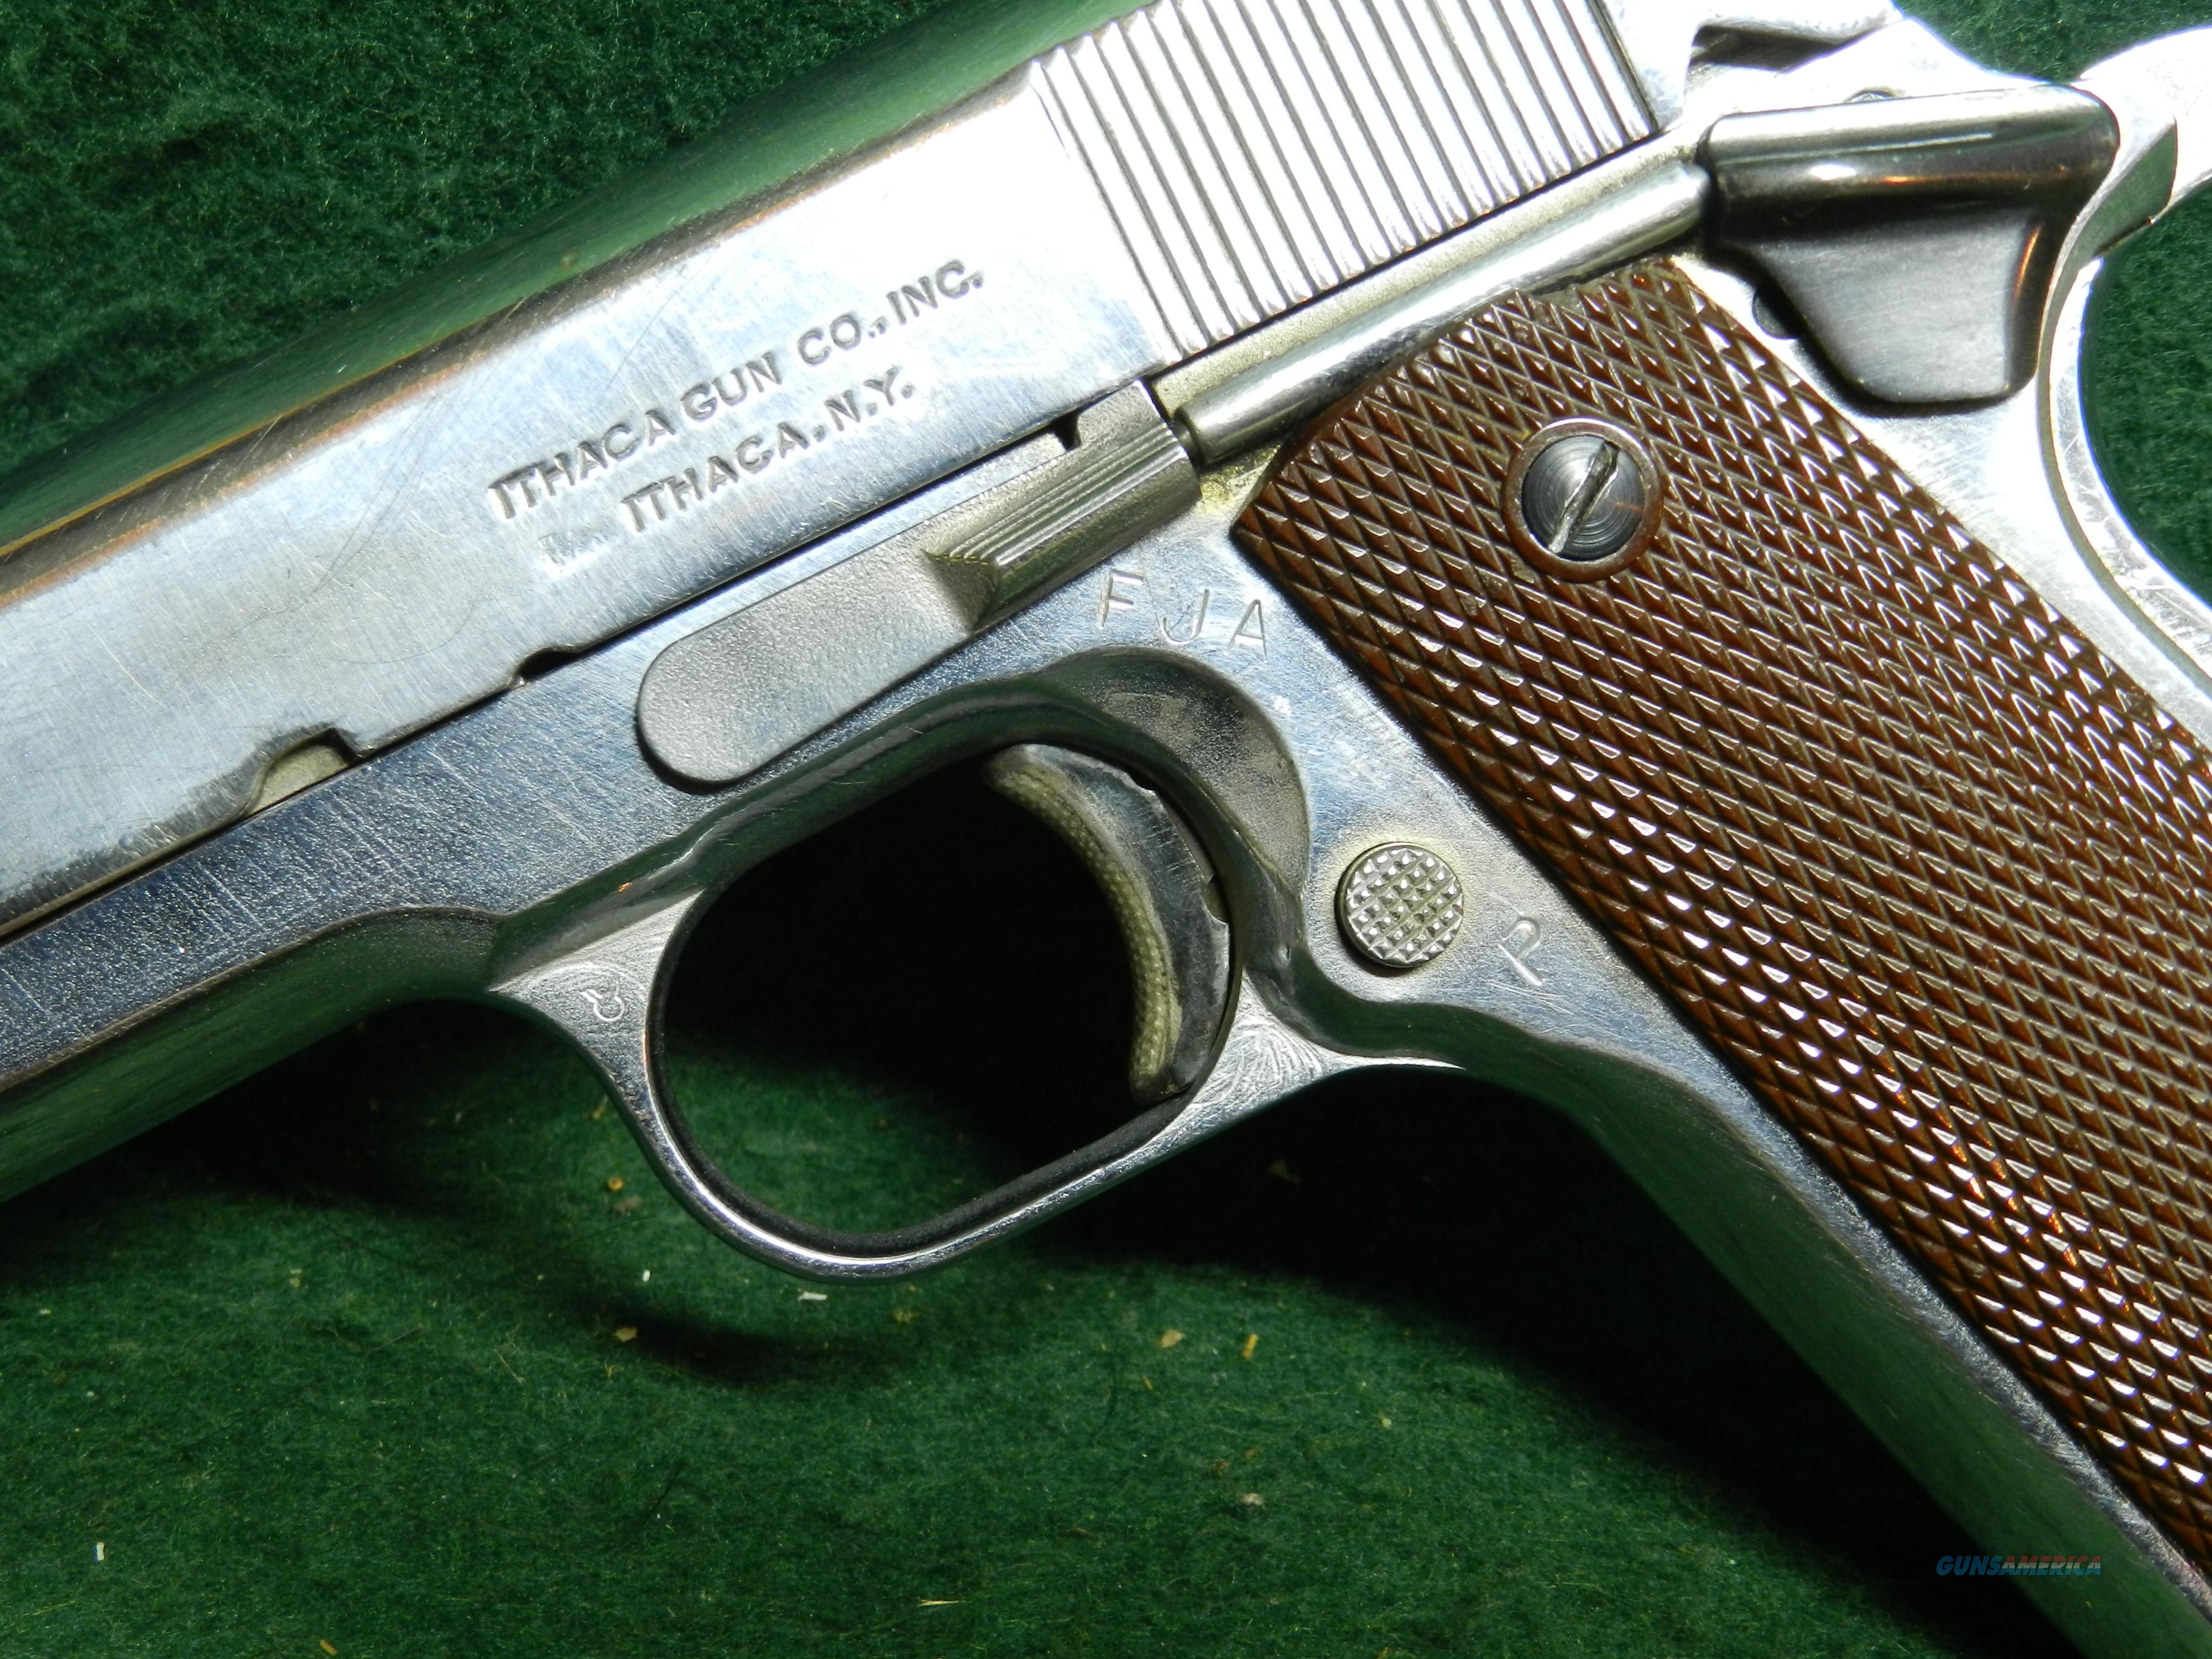 Ithaca 1911 A1 45 Acp Chrome Plated For Sale At 960948759 7853